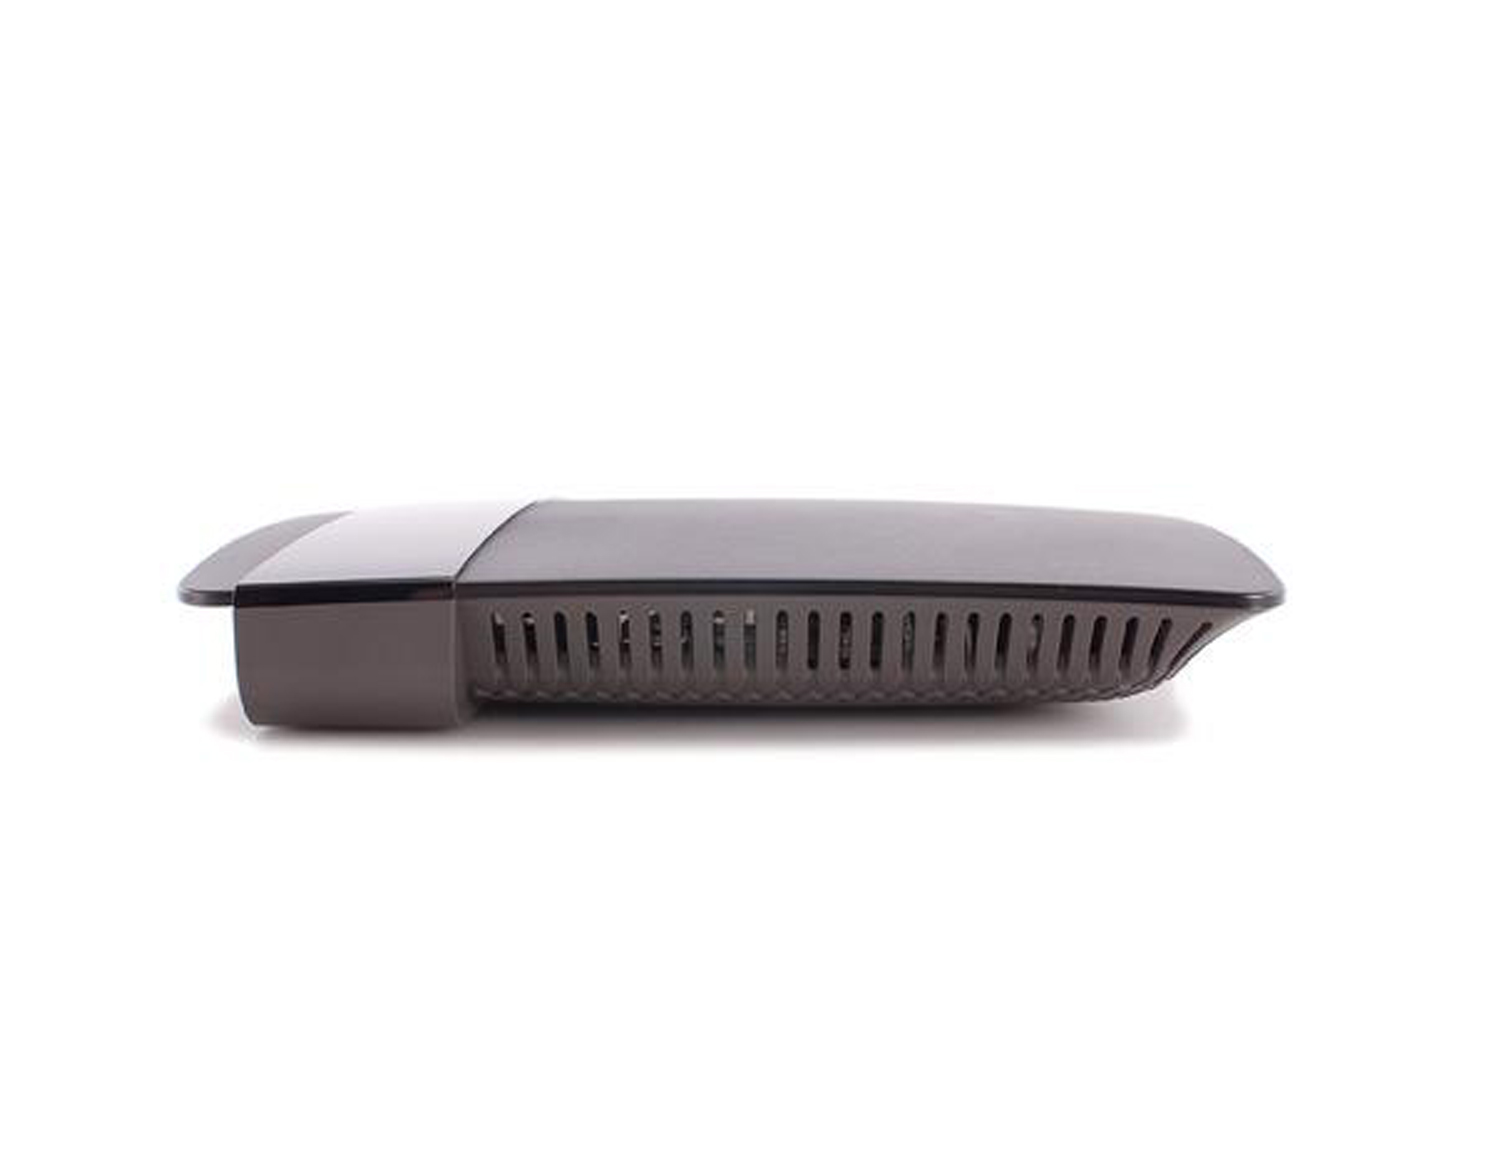 Linksys E-2500 Advanced Wireless-n Router